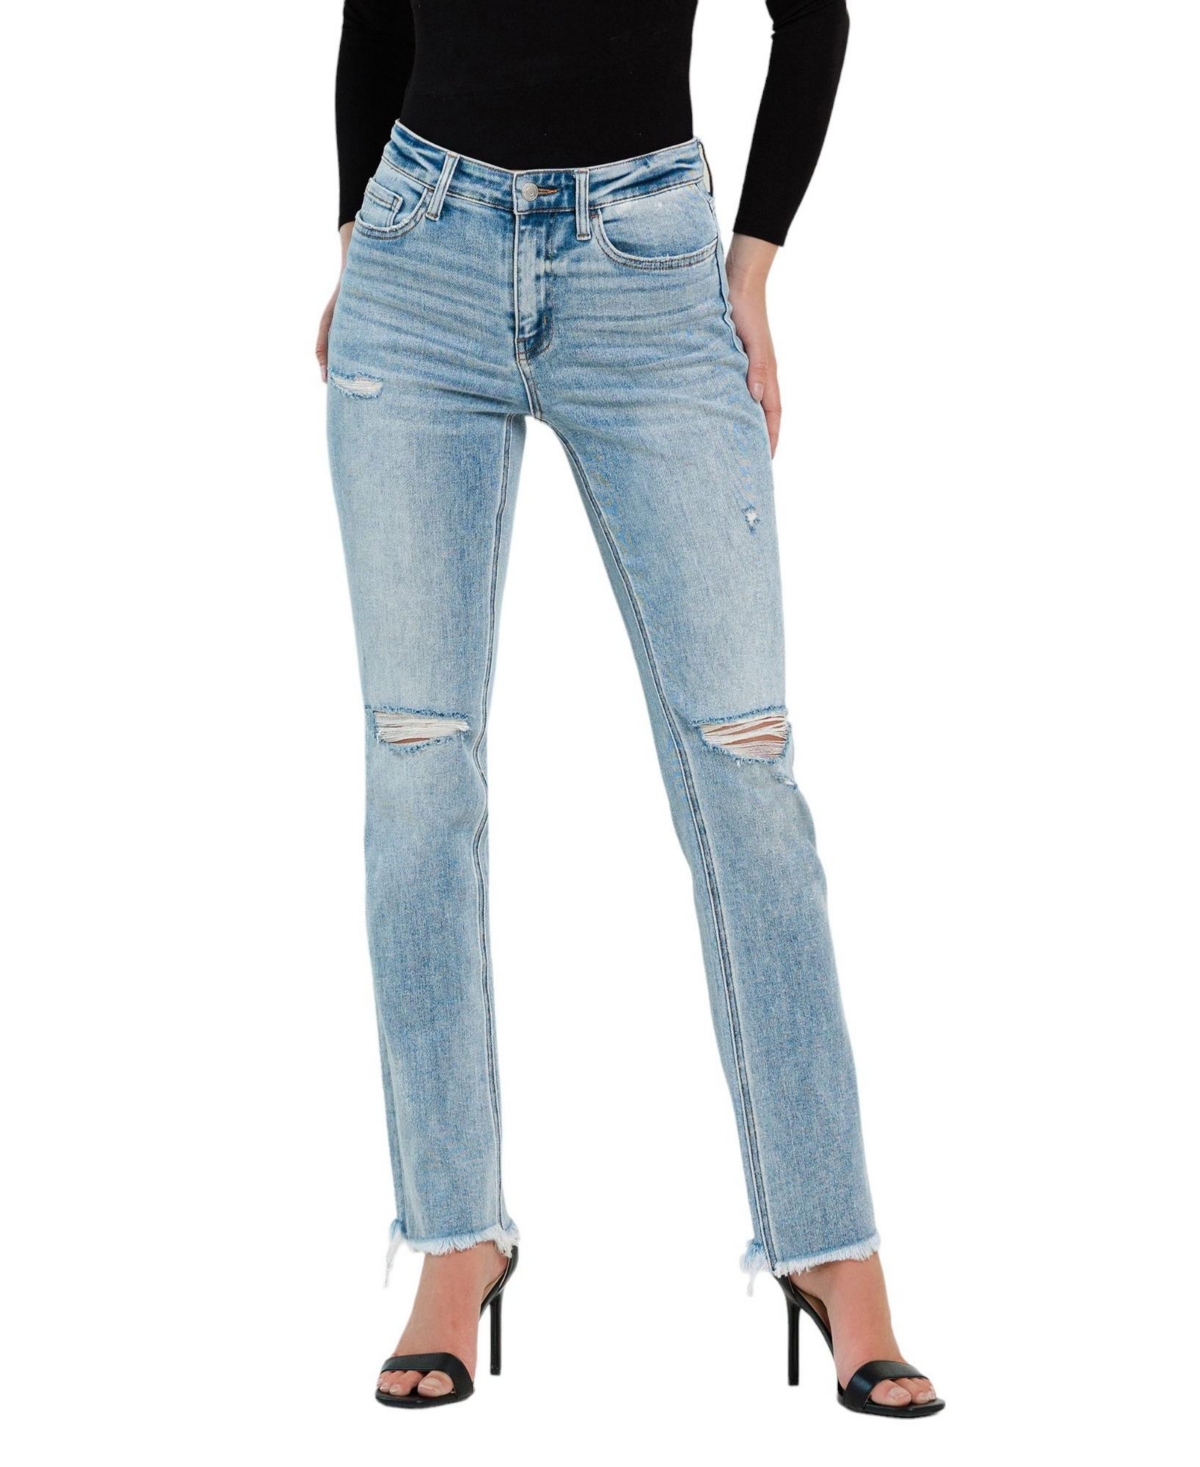 Women's High Rise Straight Jeans - Pamper blue